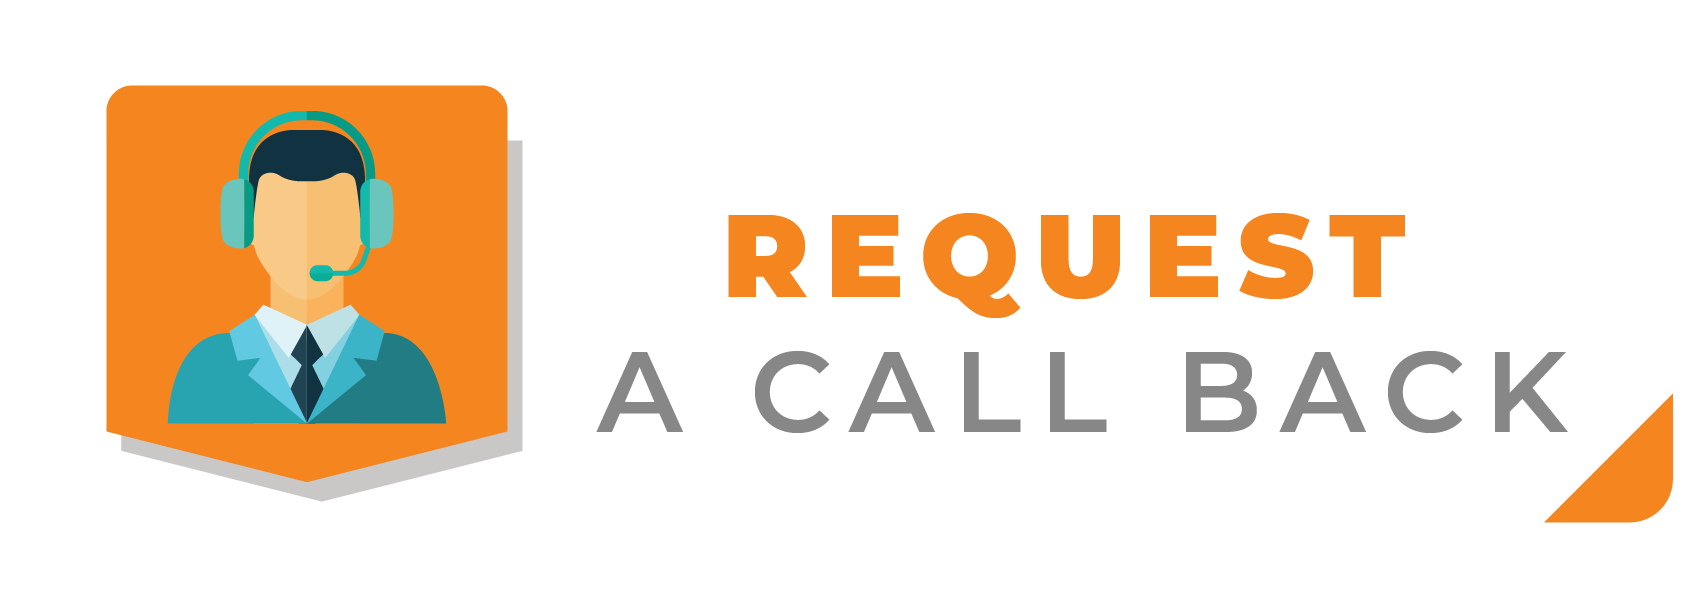 request-a-call-back.png